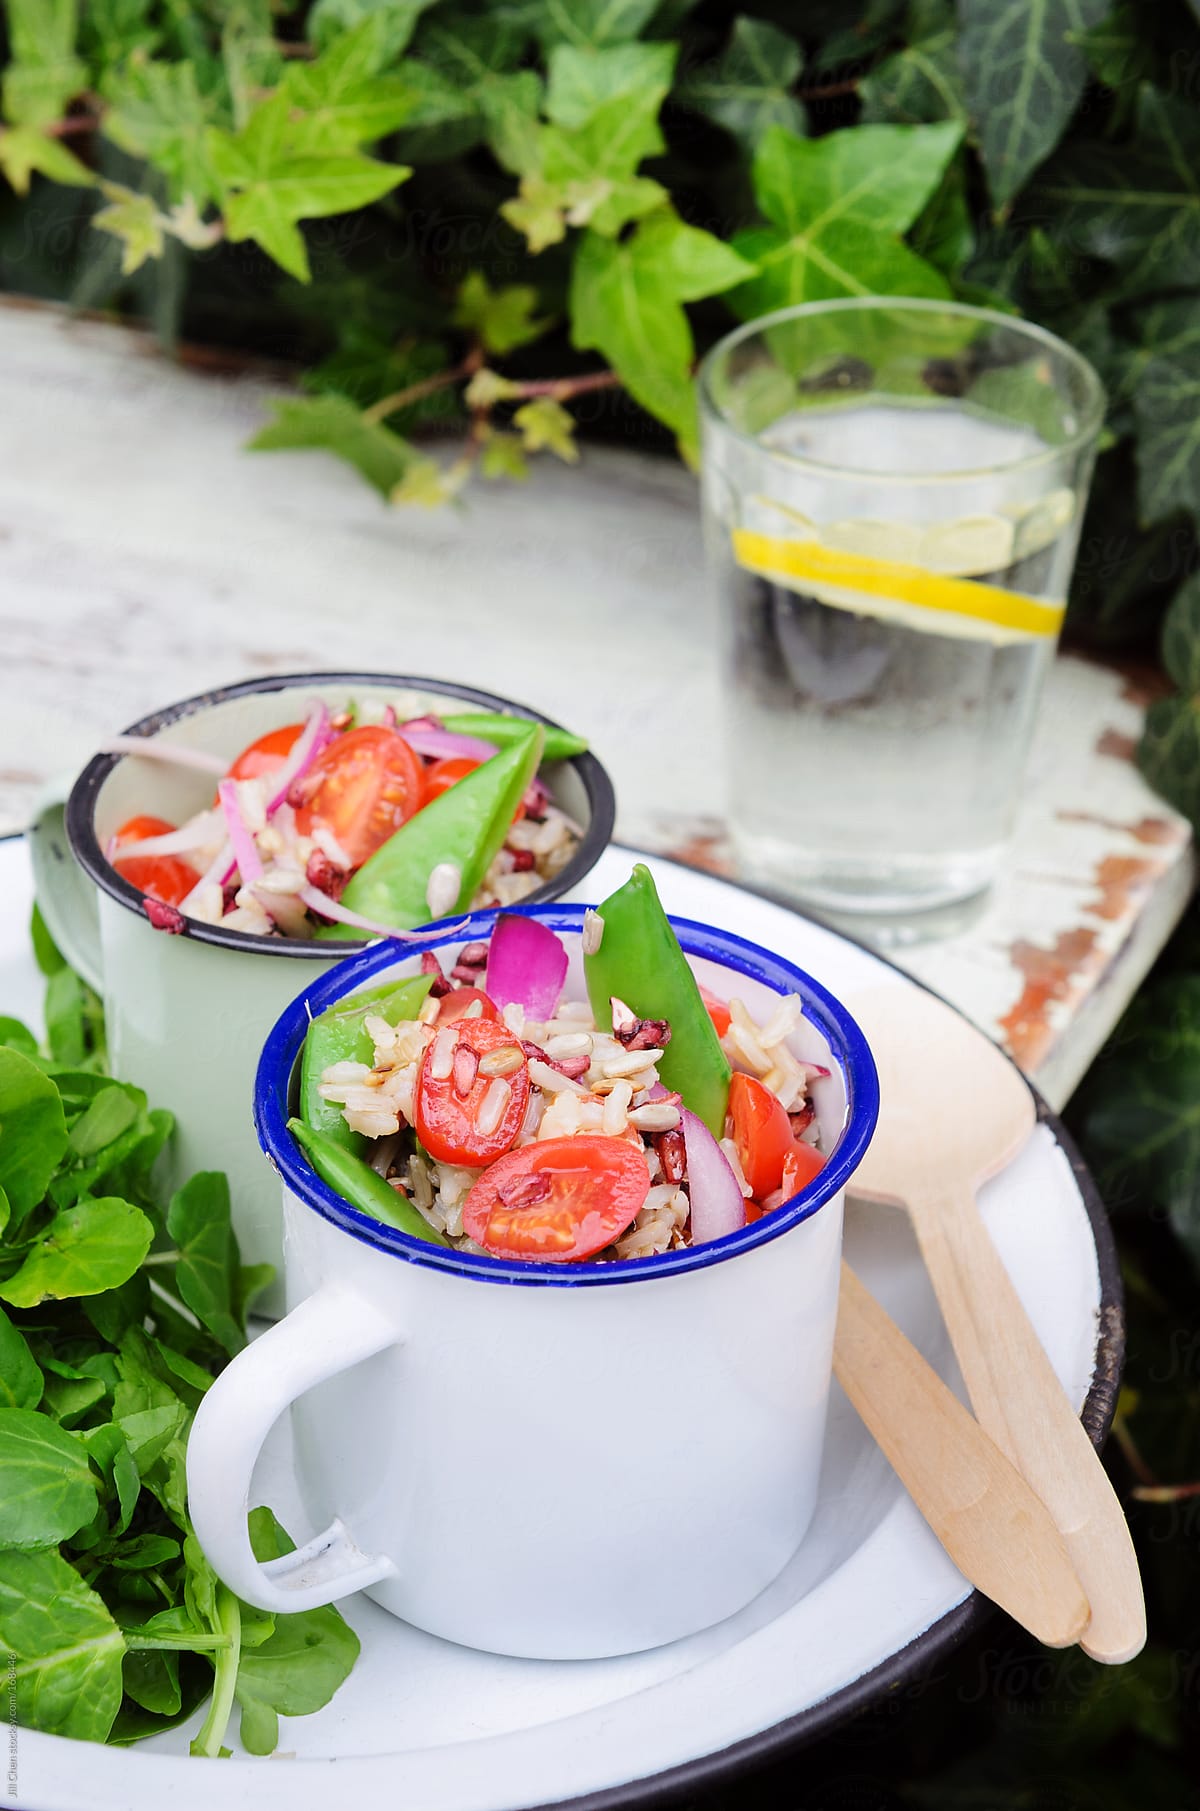 Light healthy lunch rice salad outdoors